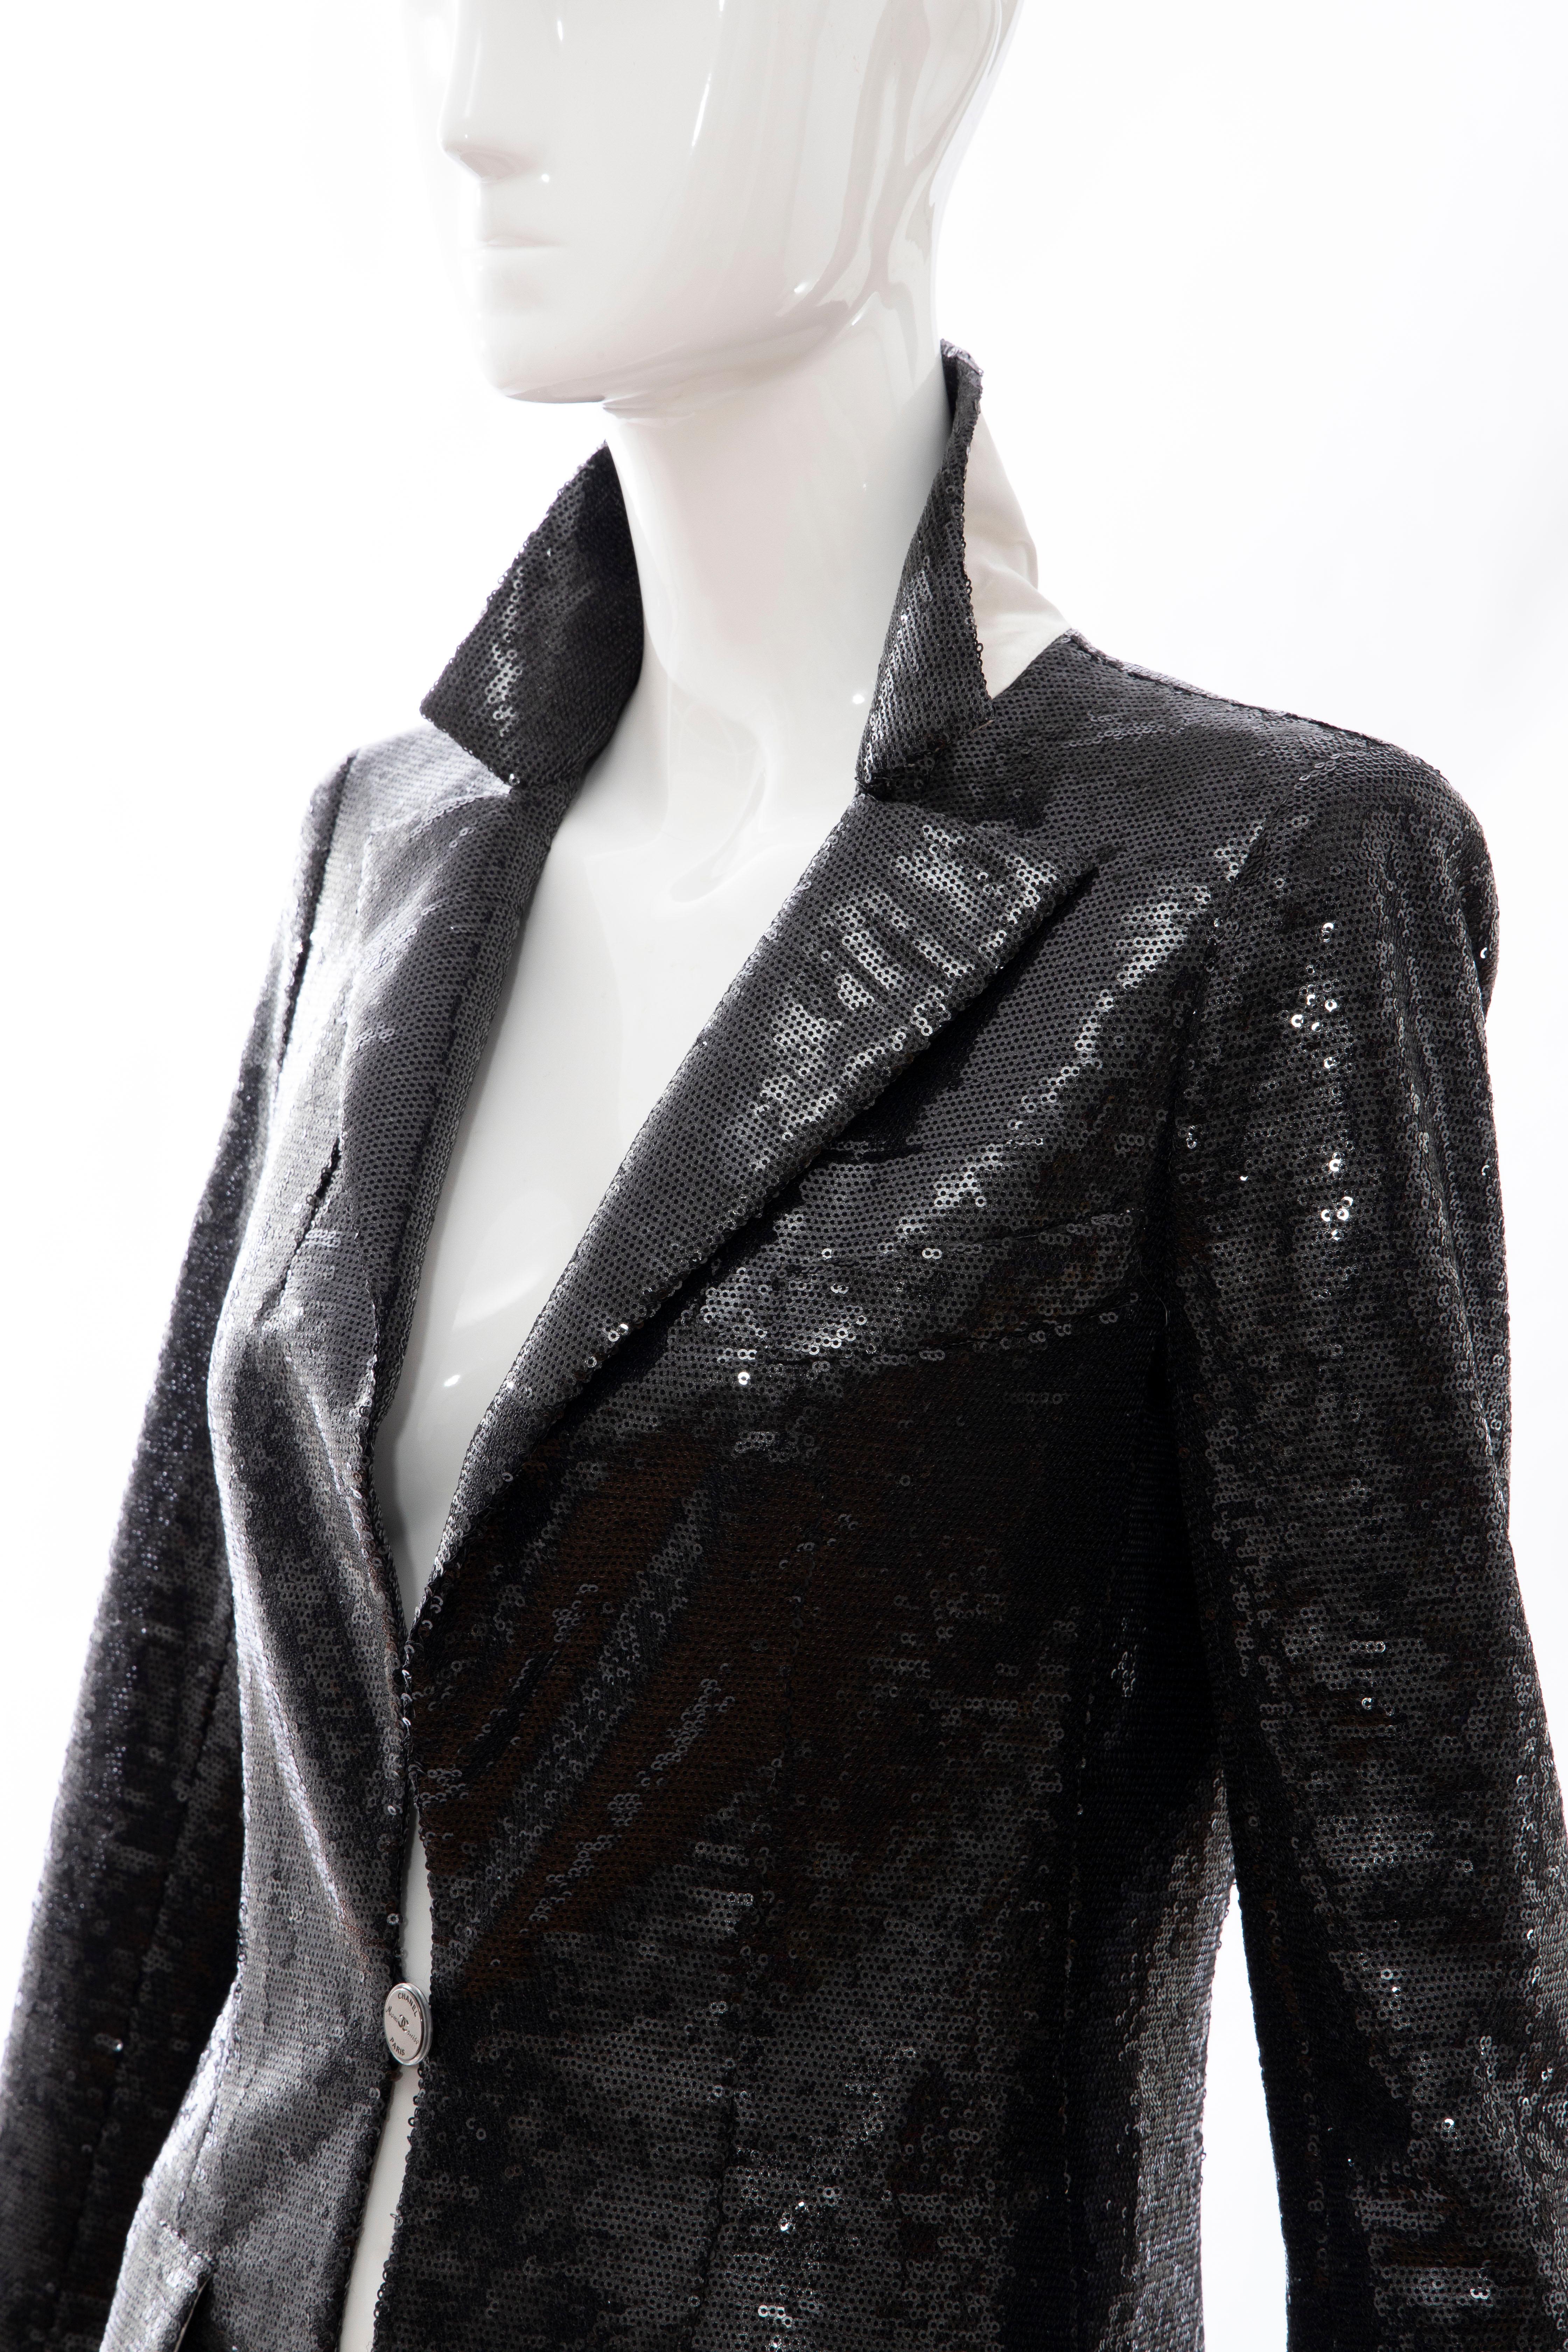 Chanel Black Embroidered Sequin Evening Jacket Ivory Silk Cuffs, Cruise 2009 For Sale 4